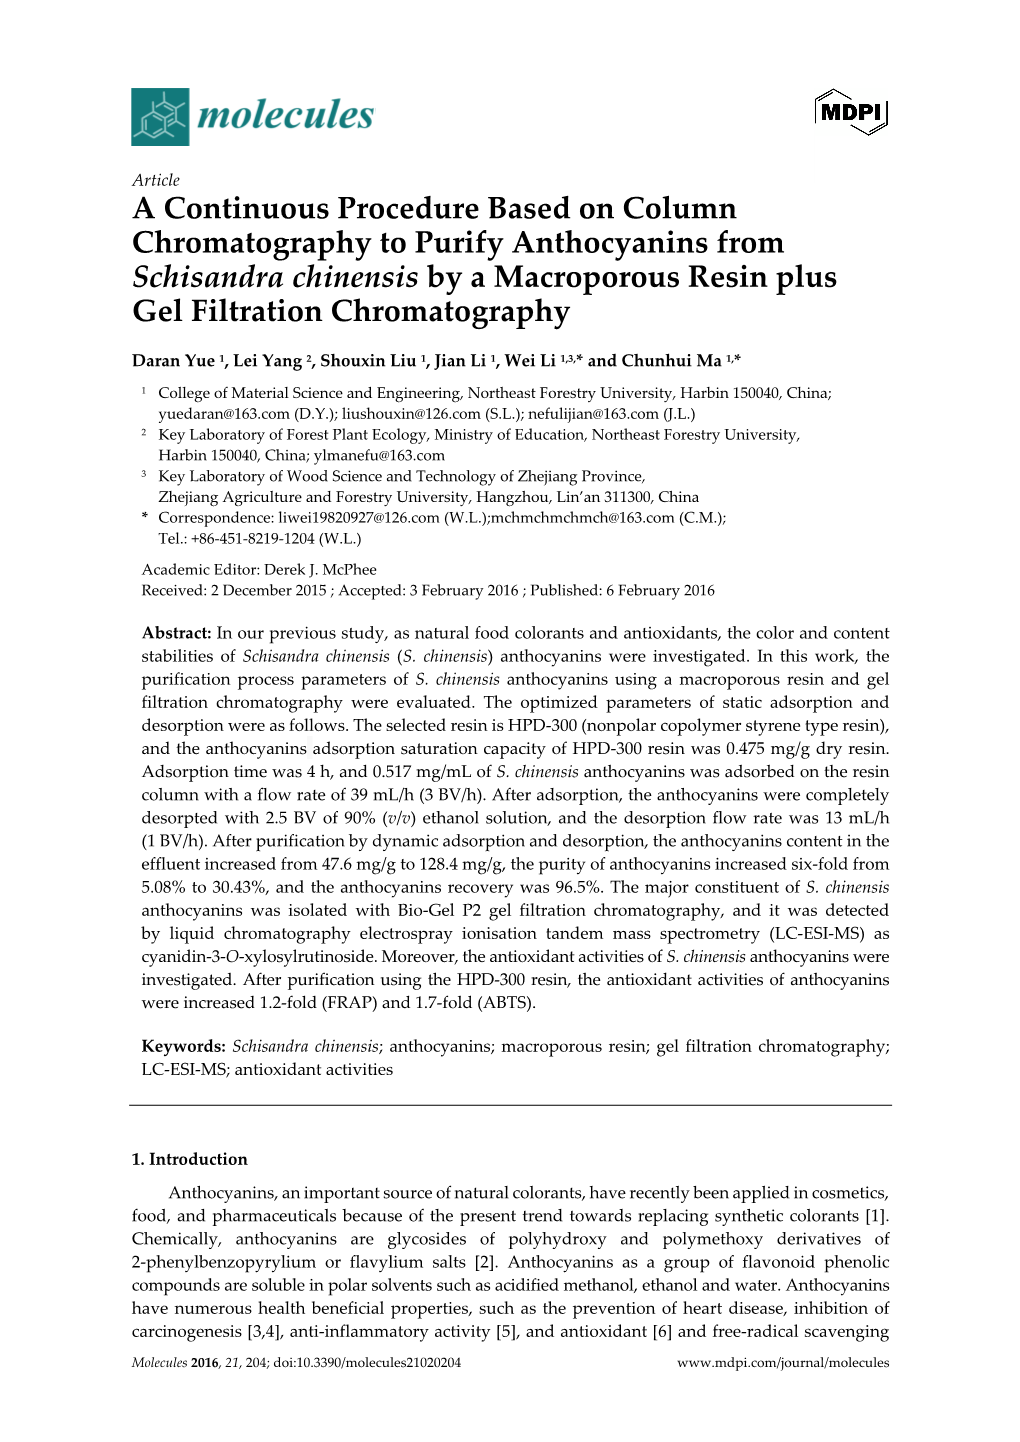 A Continuous Procedure Based on Column Chromatography to Purify Anthocyanins from Schisandra Chinensis by a Macroporous Resin Plus Gel Filtration Chromatography